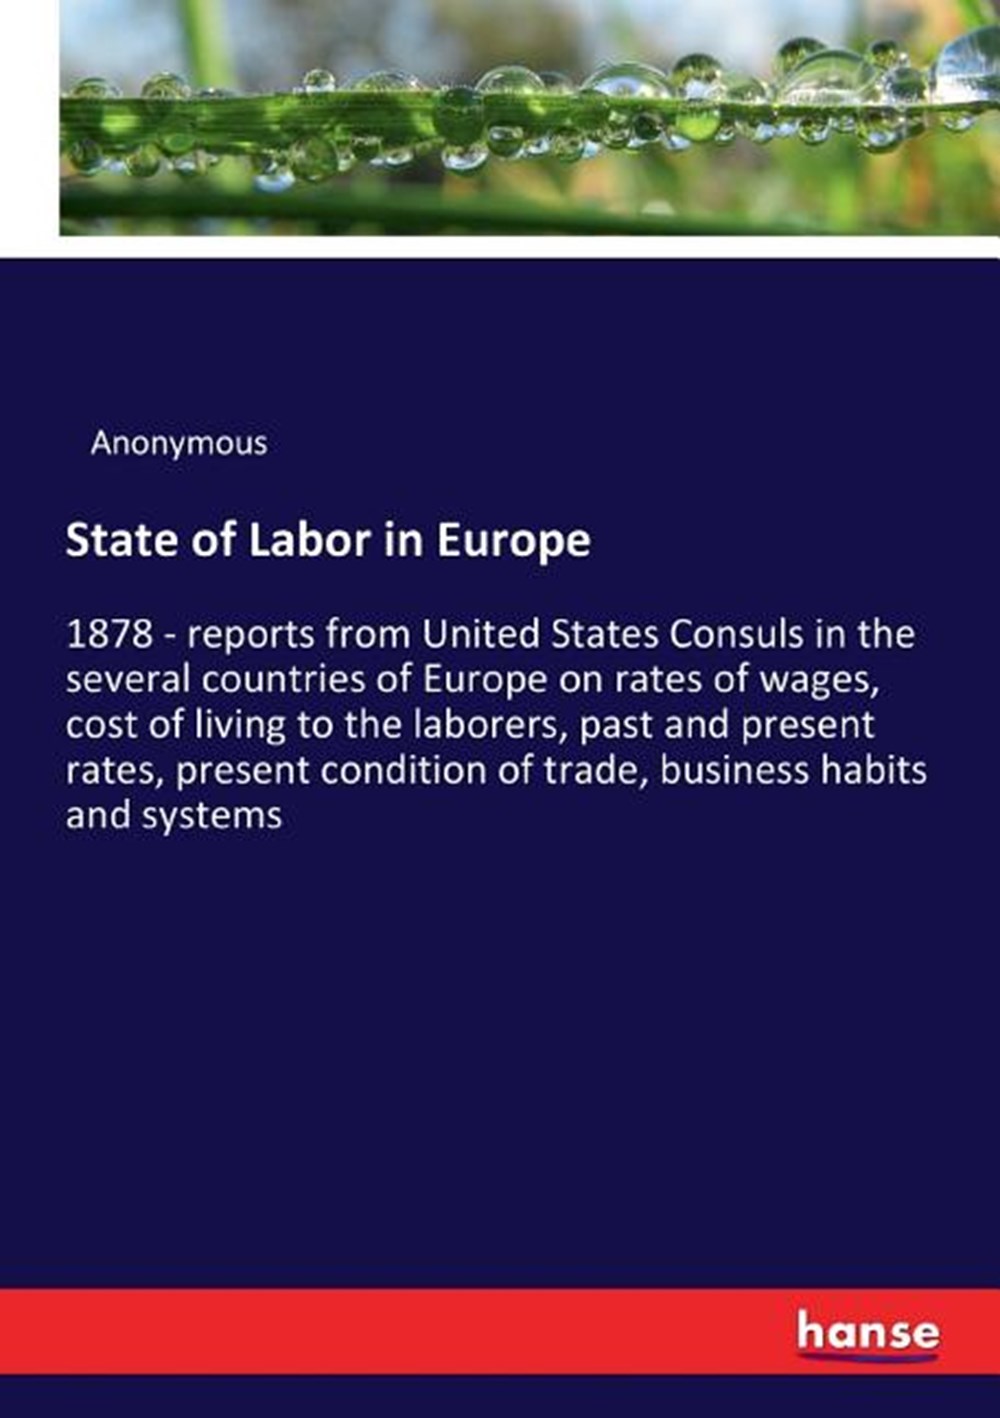 State of Labor in Europe: 1878 - reports from United States Consuls in the several countries of Euro